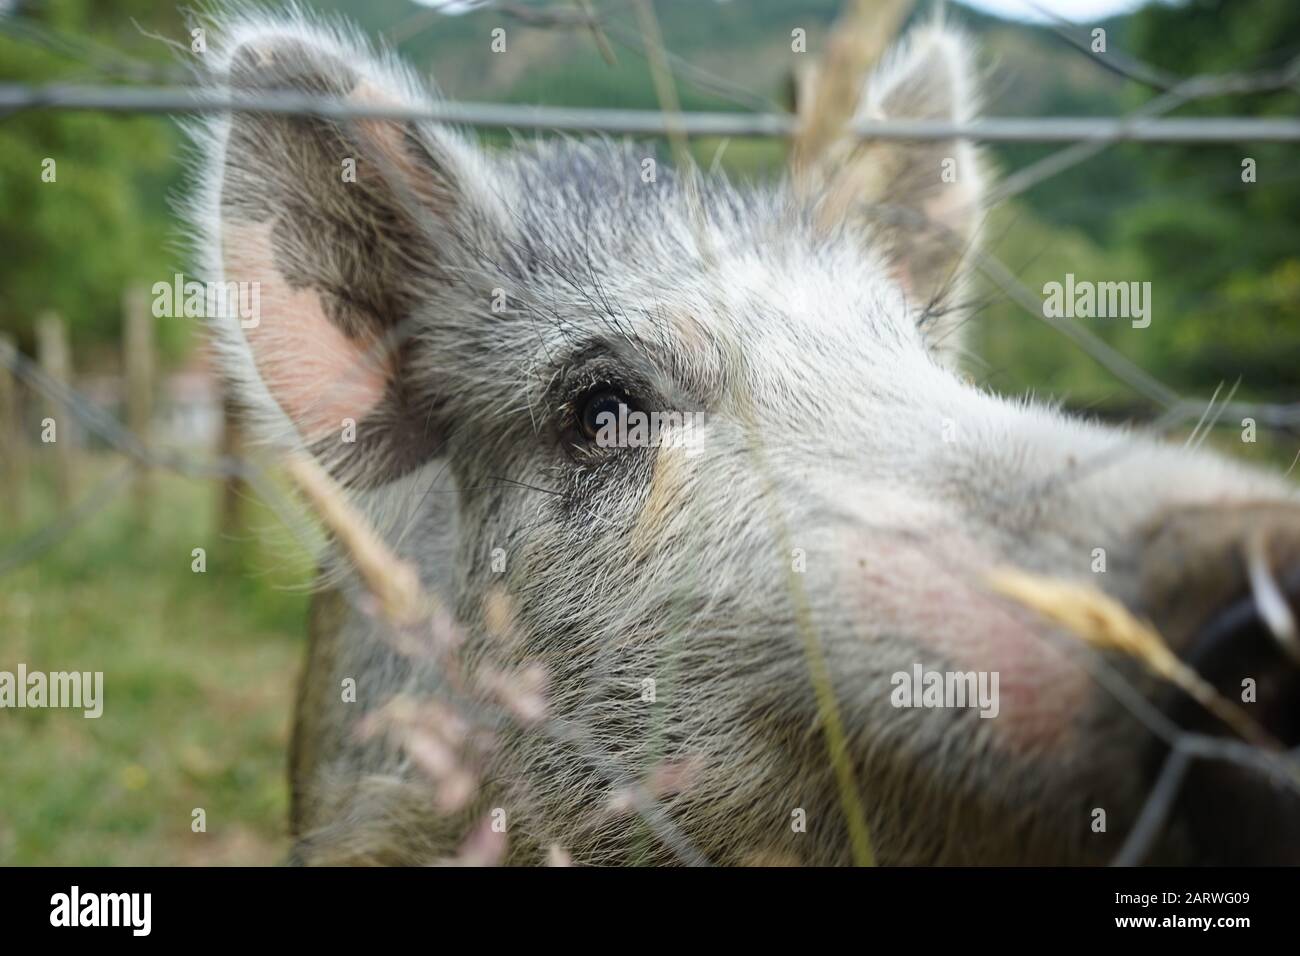 Closeup shot of a gray pig in a farm with wire fences on a cool day Stock Photo